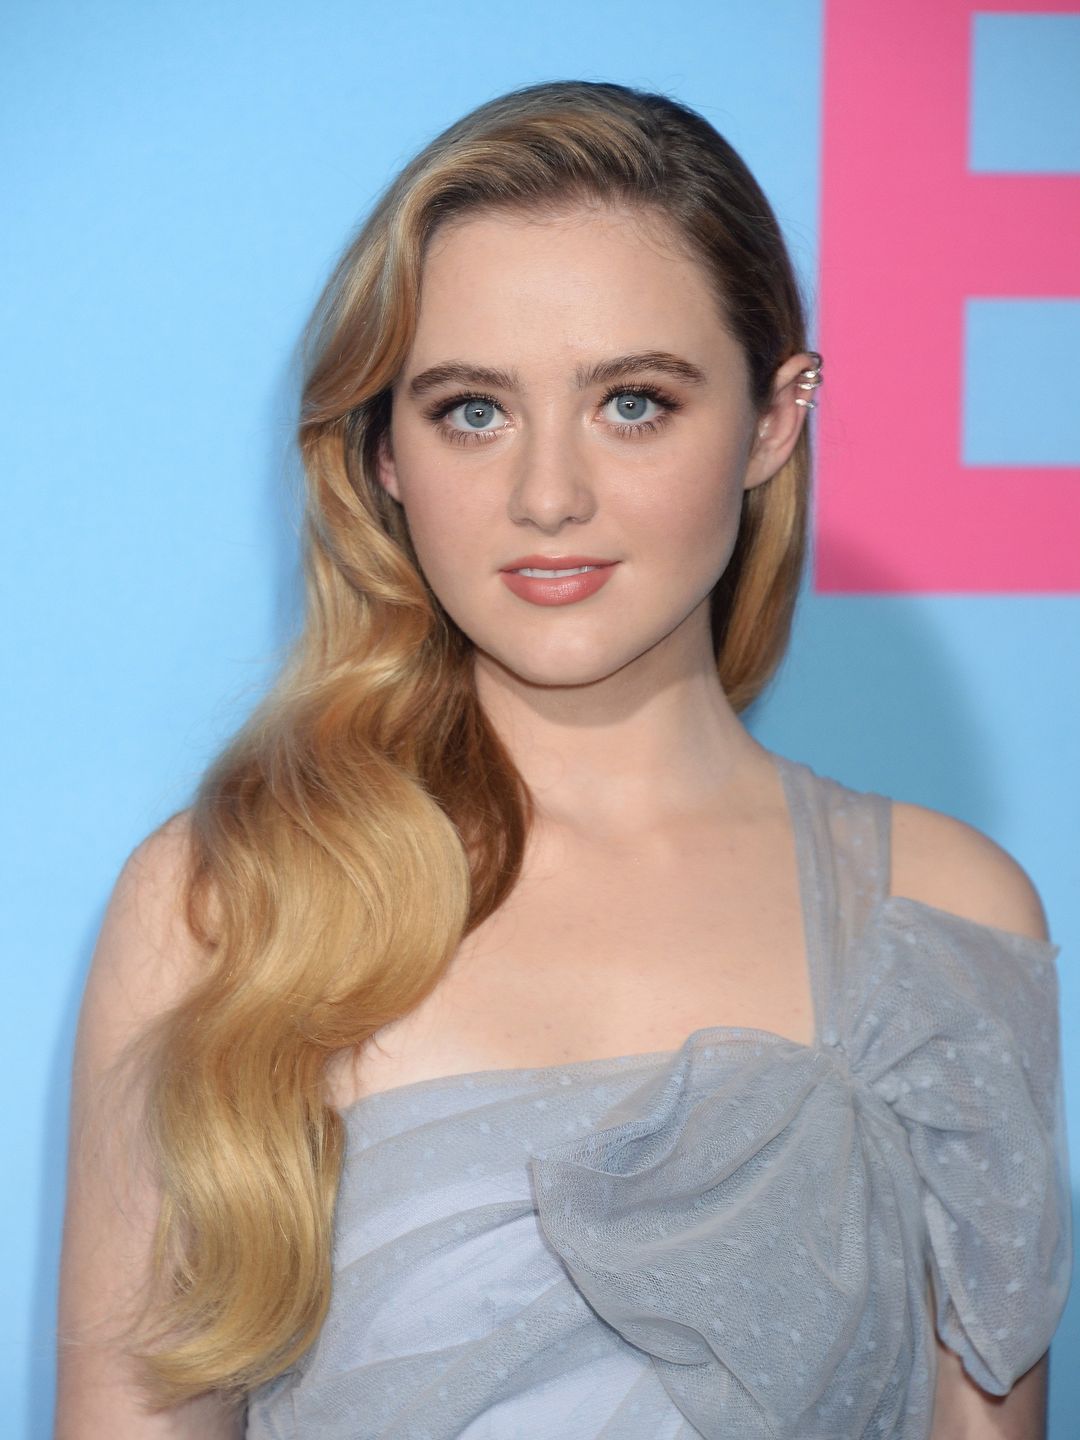 Kathryn Newton in her youth